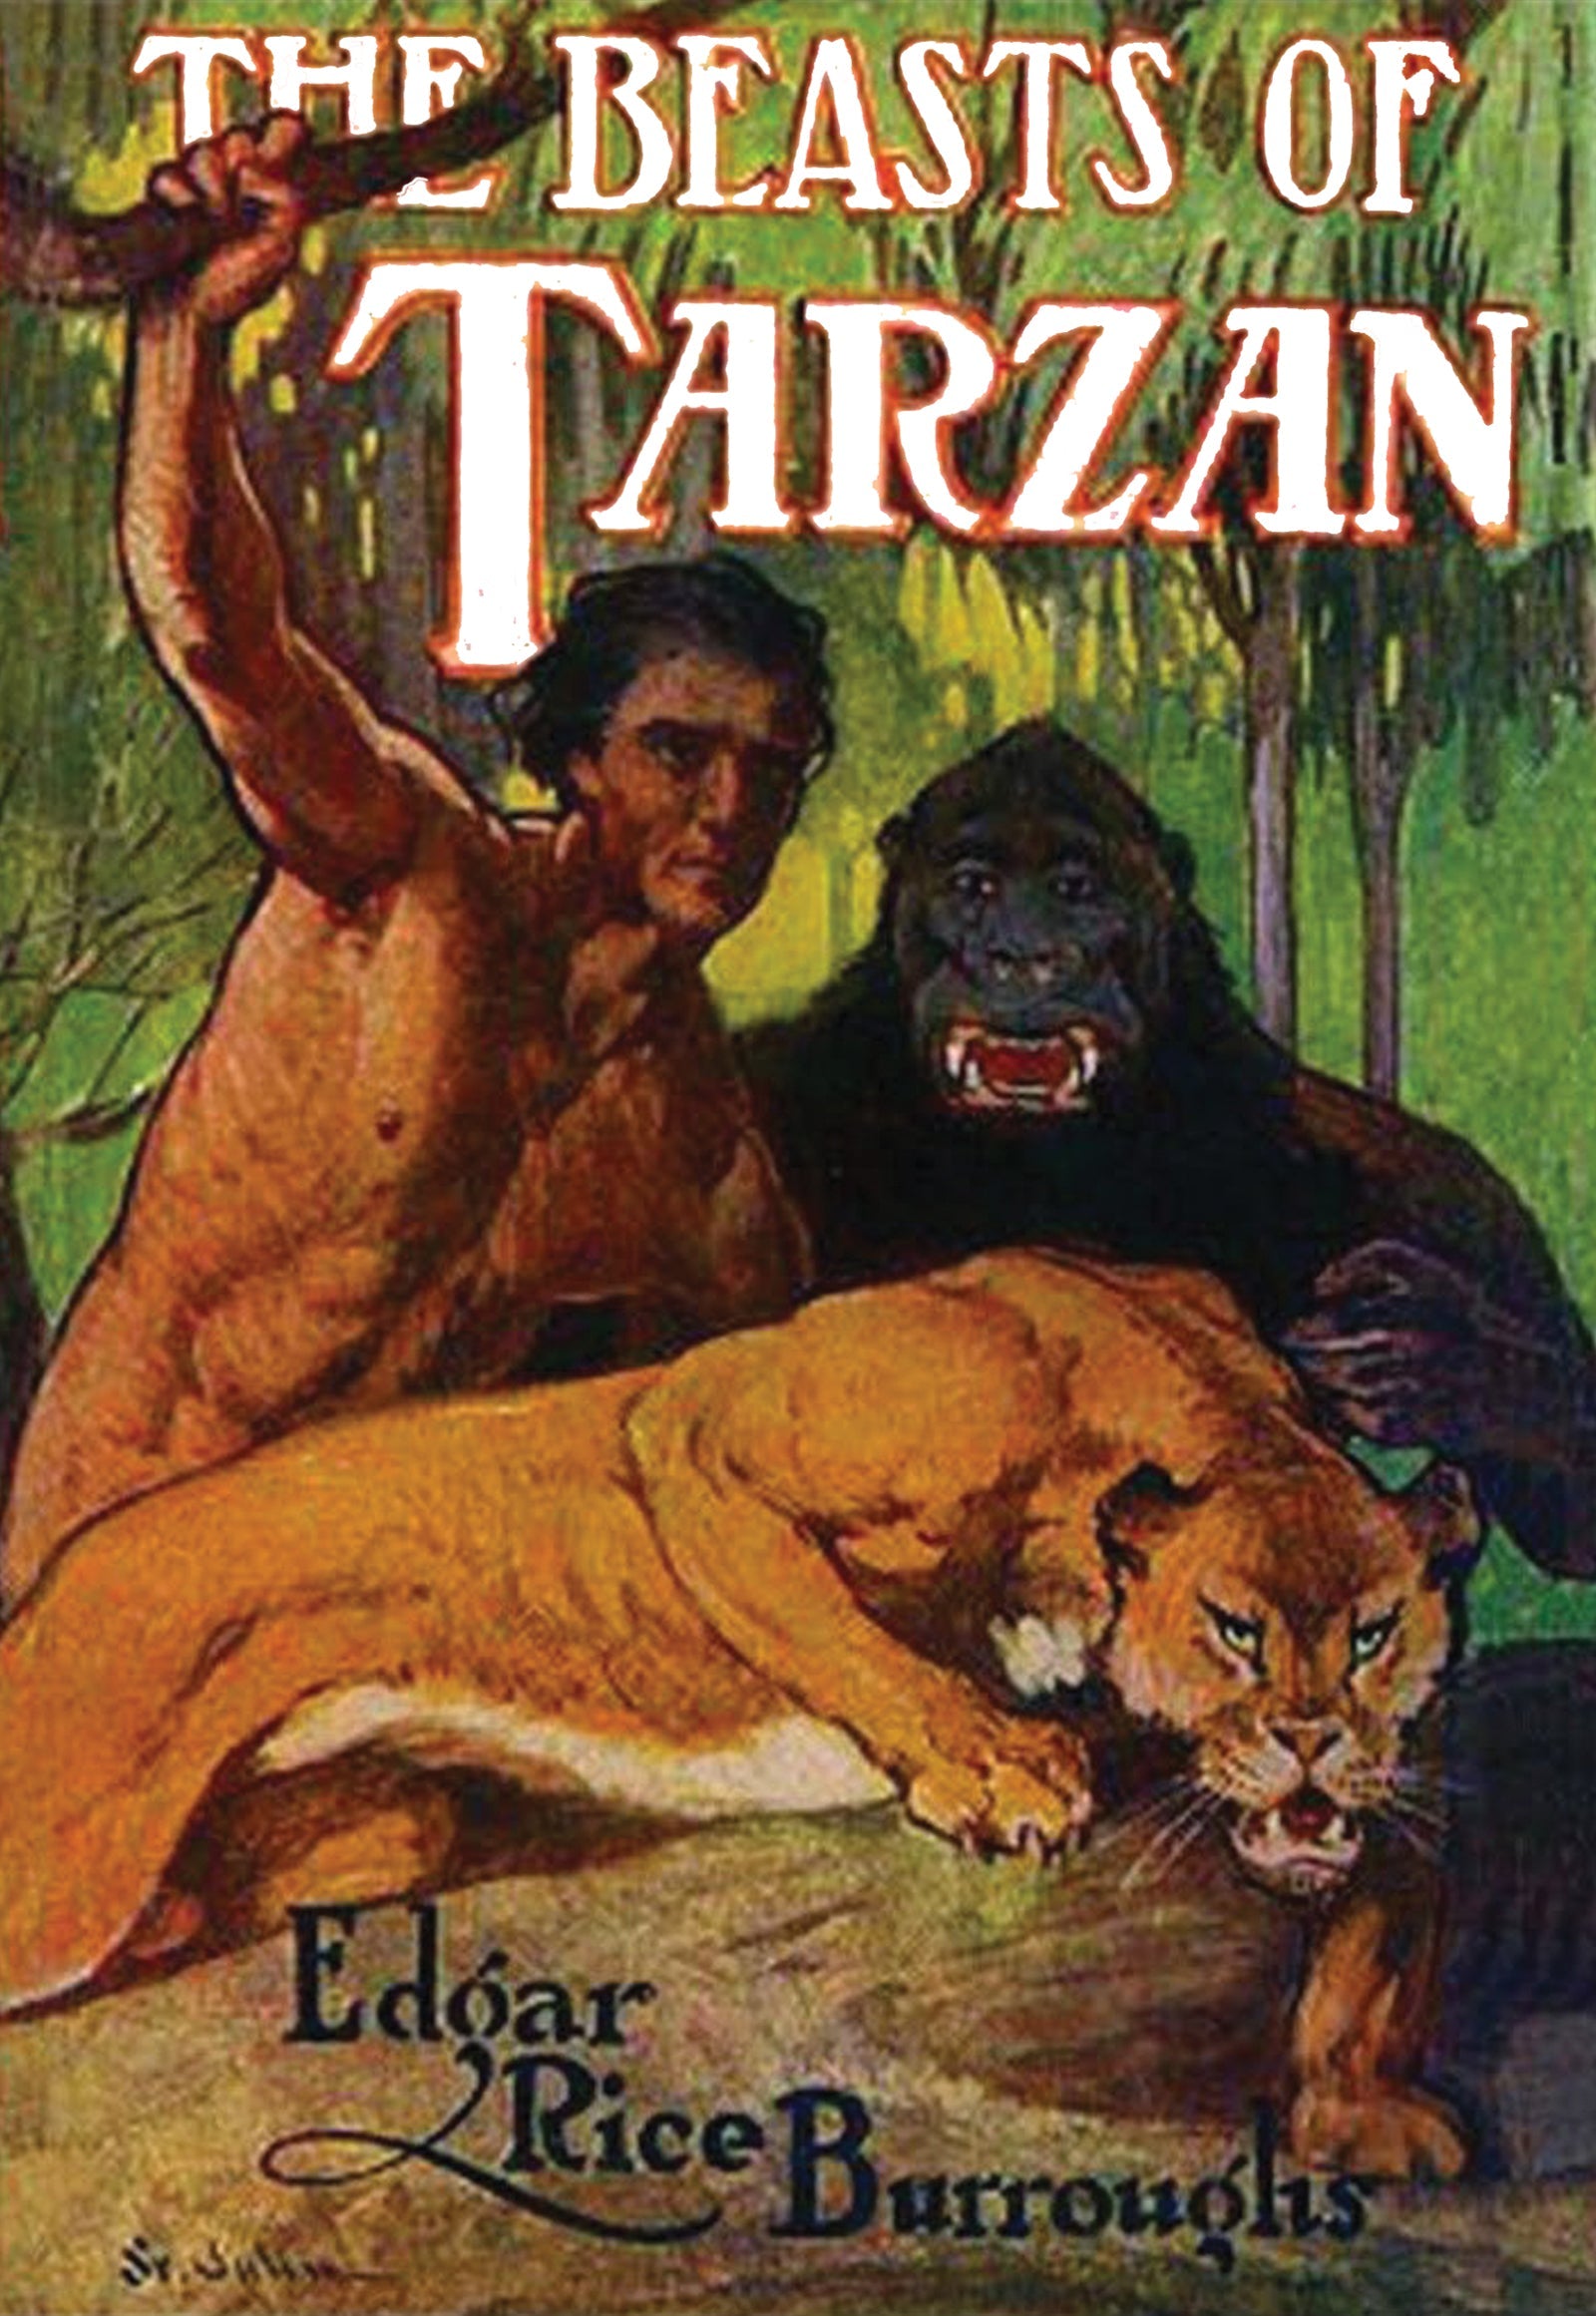 Cover art for The Beasts of Tarzan.